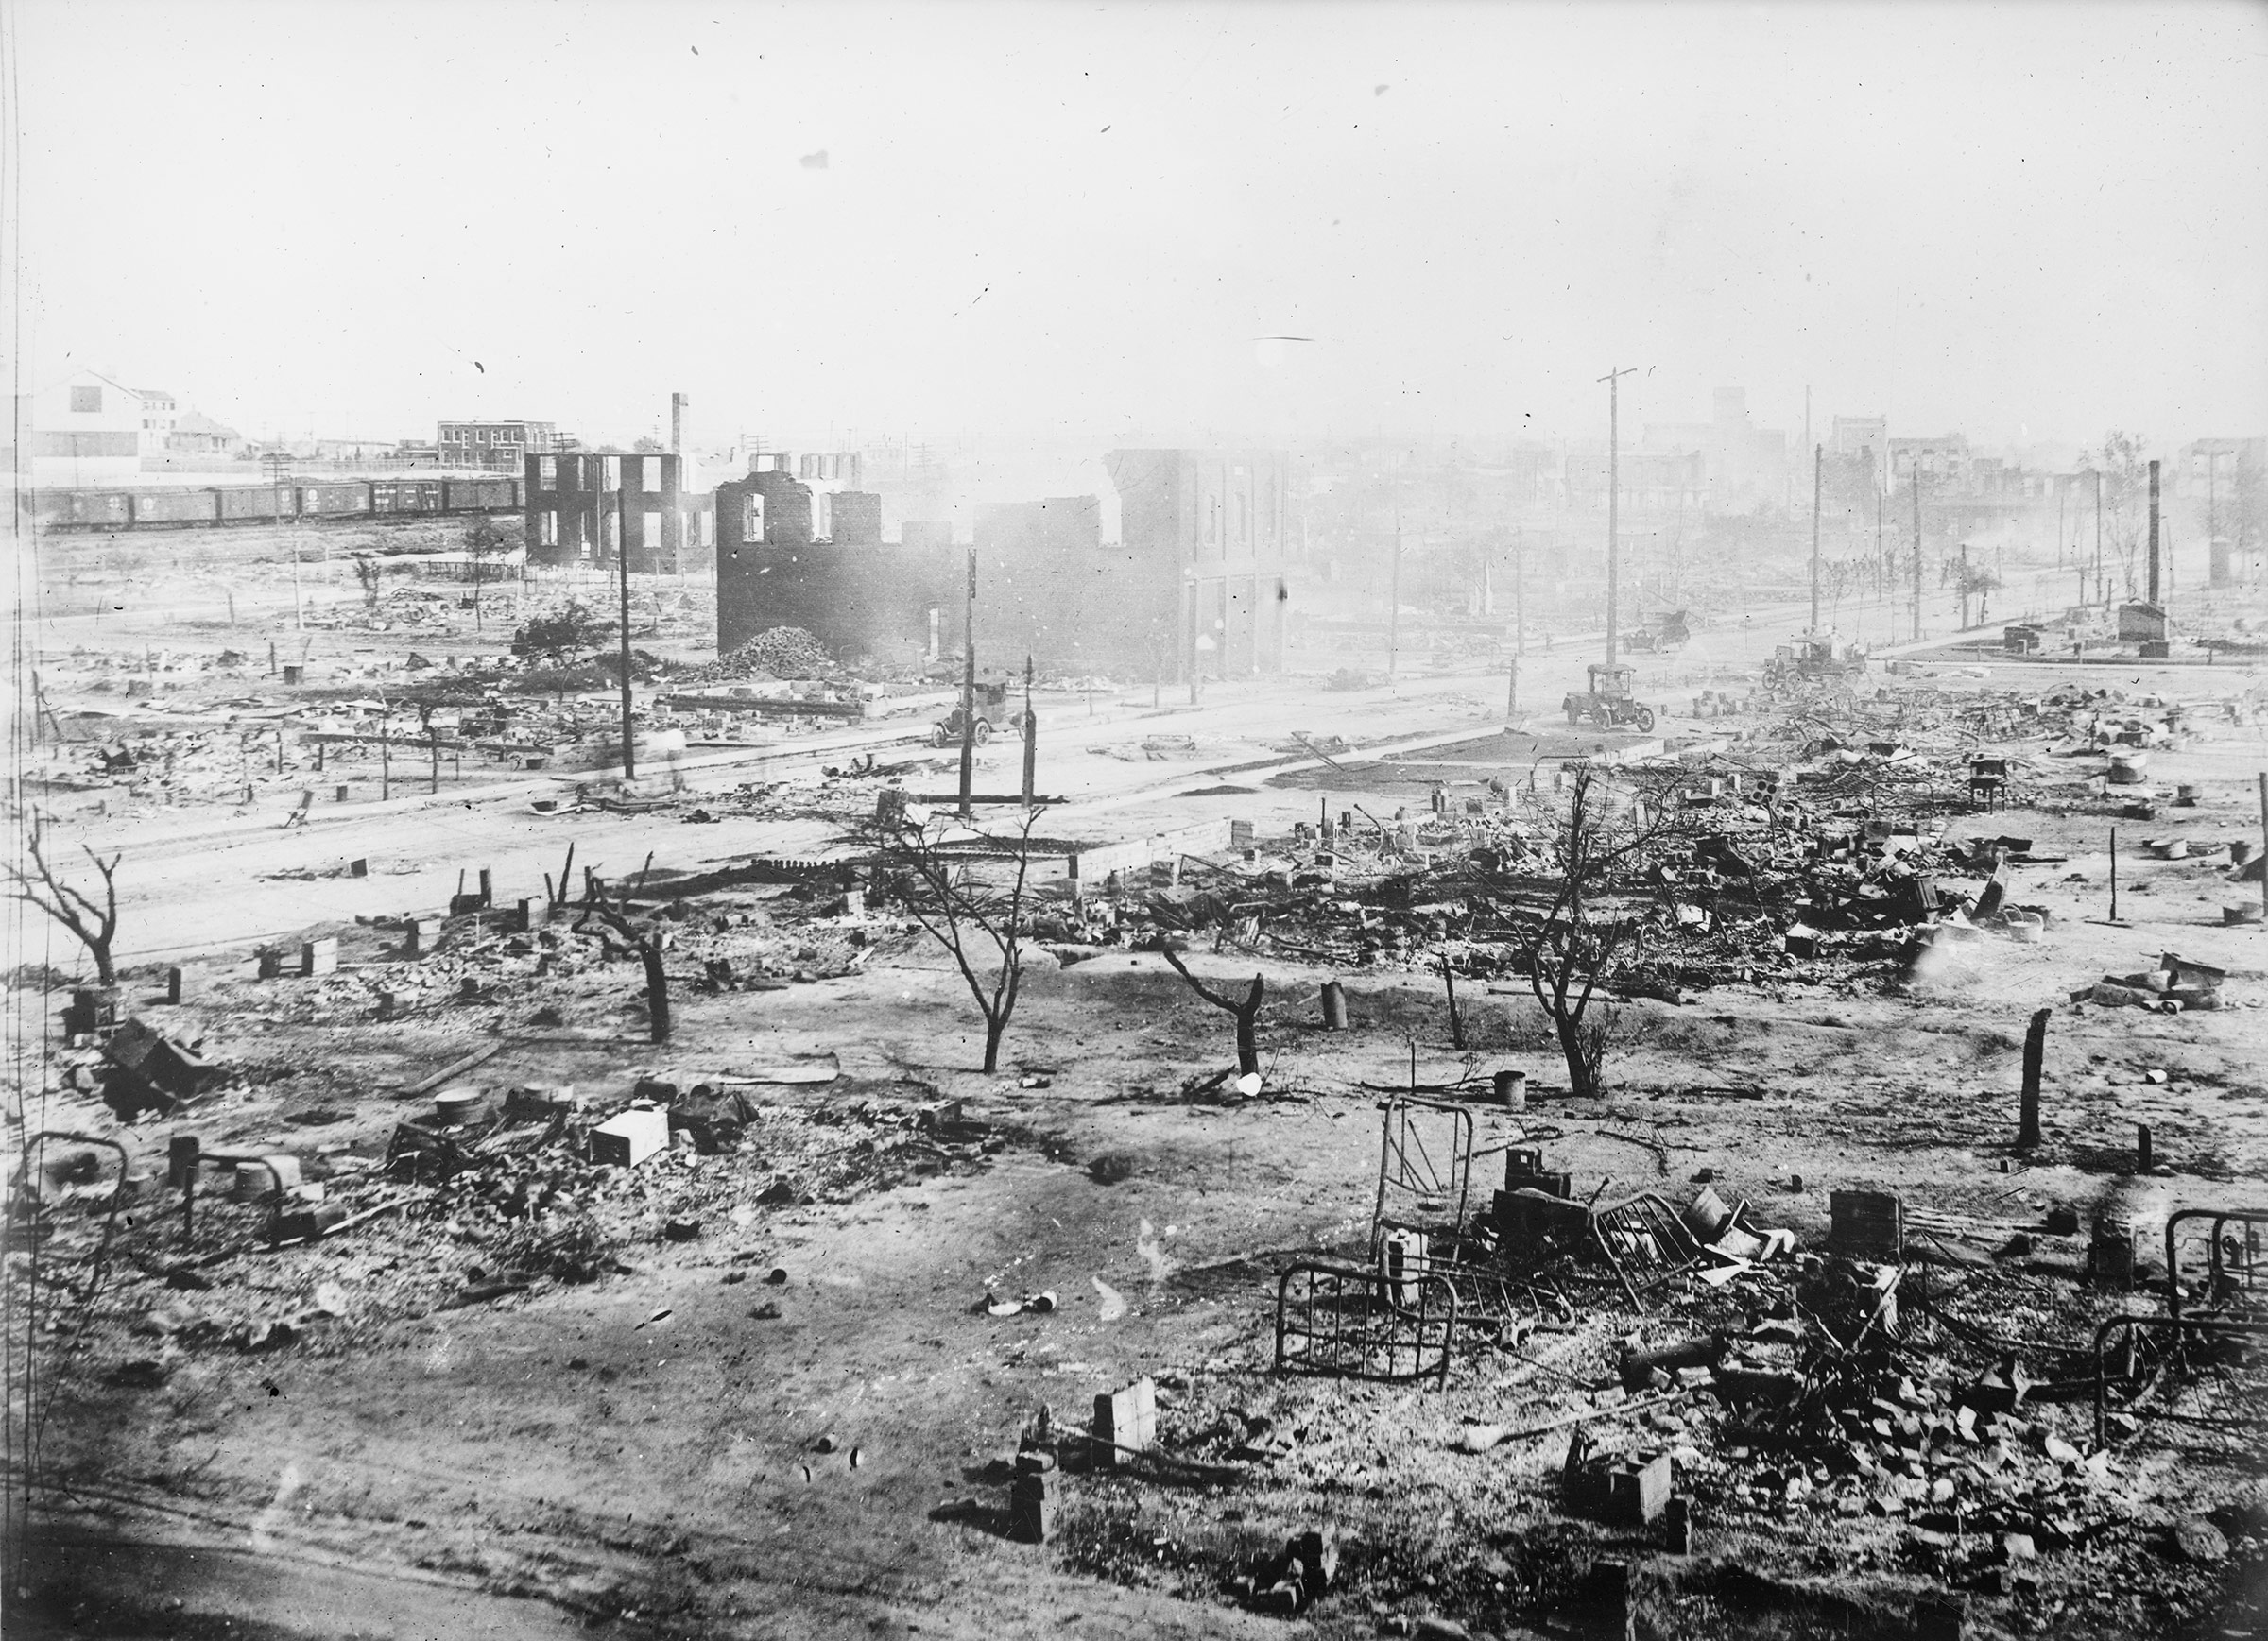 The Greenwood district of Tulsa, Okla., in 1921, after the Tulsa Race Massacre.